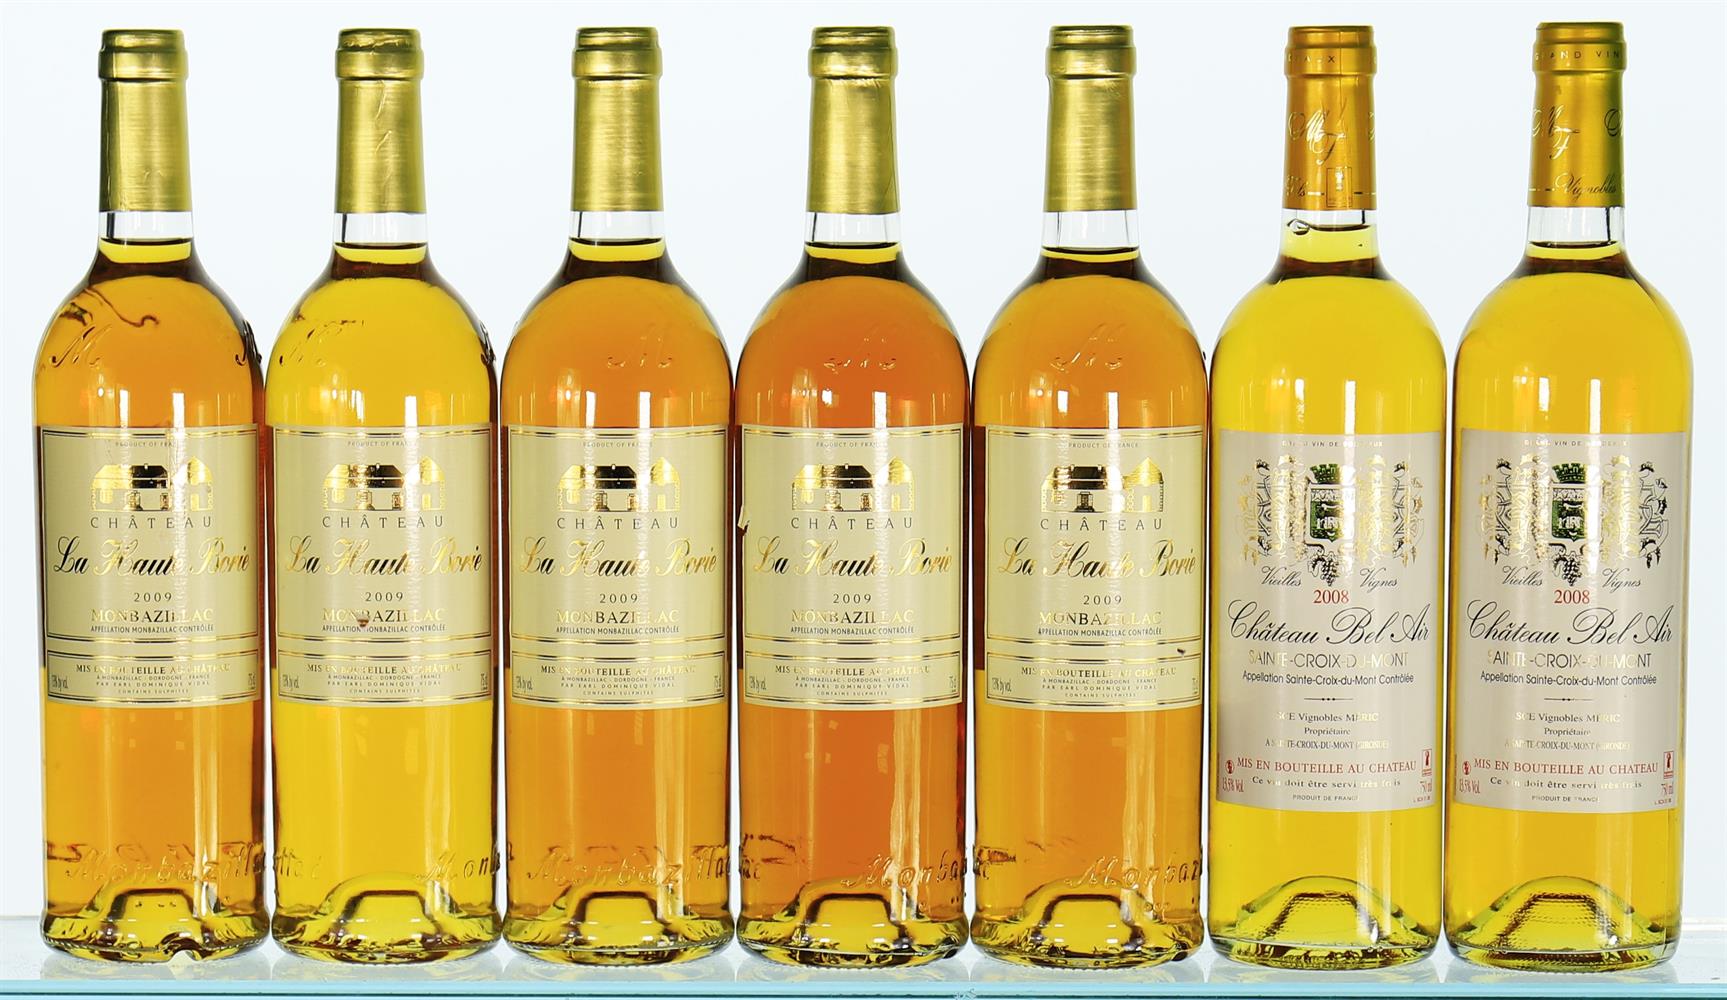 2008/2009 Mixed Case of Sweet Wines